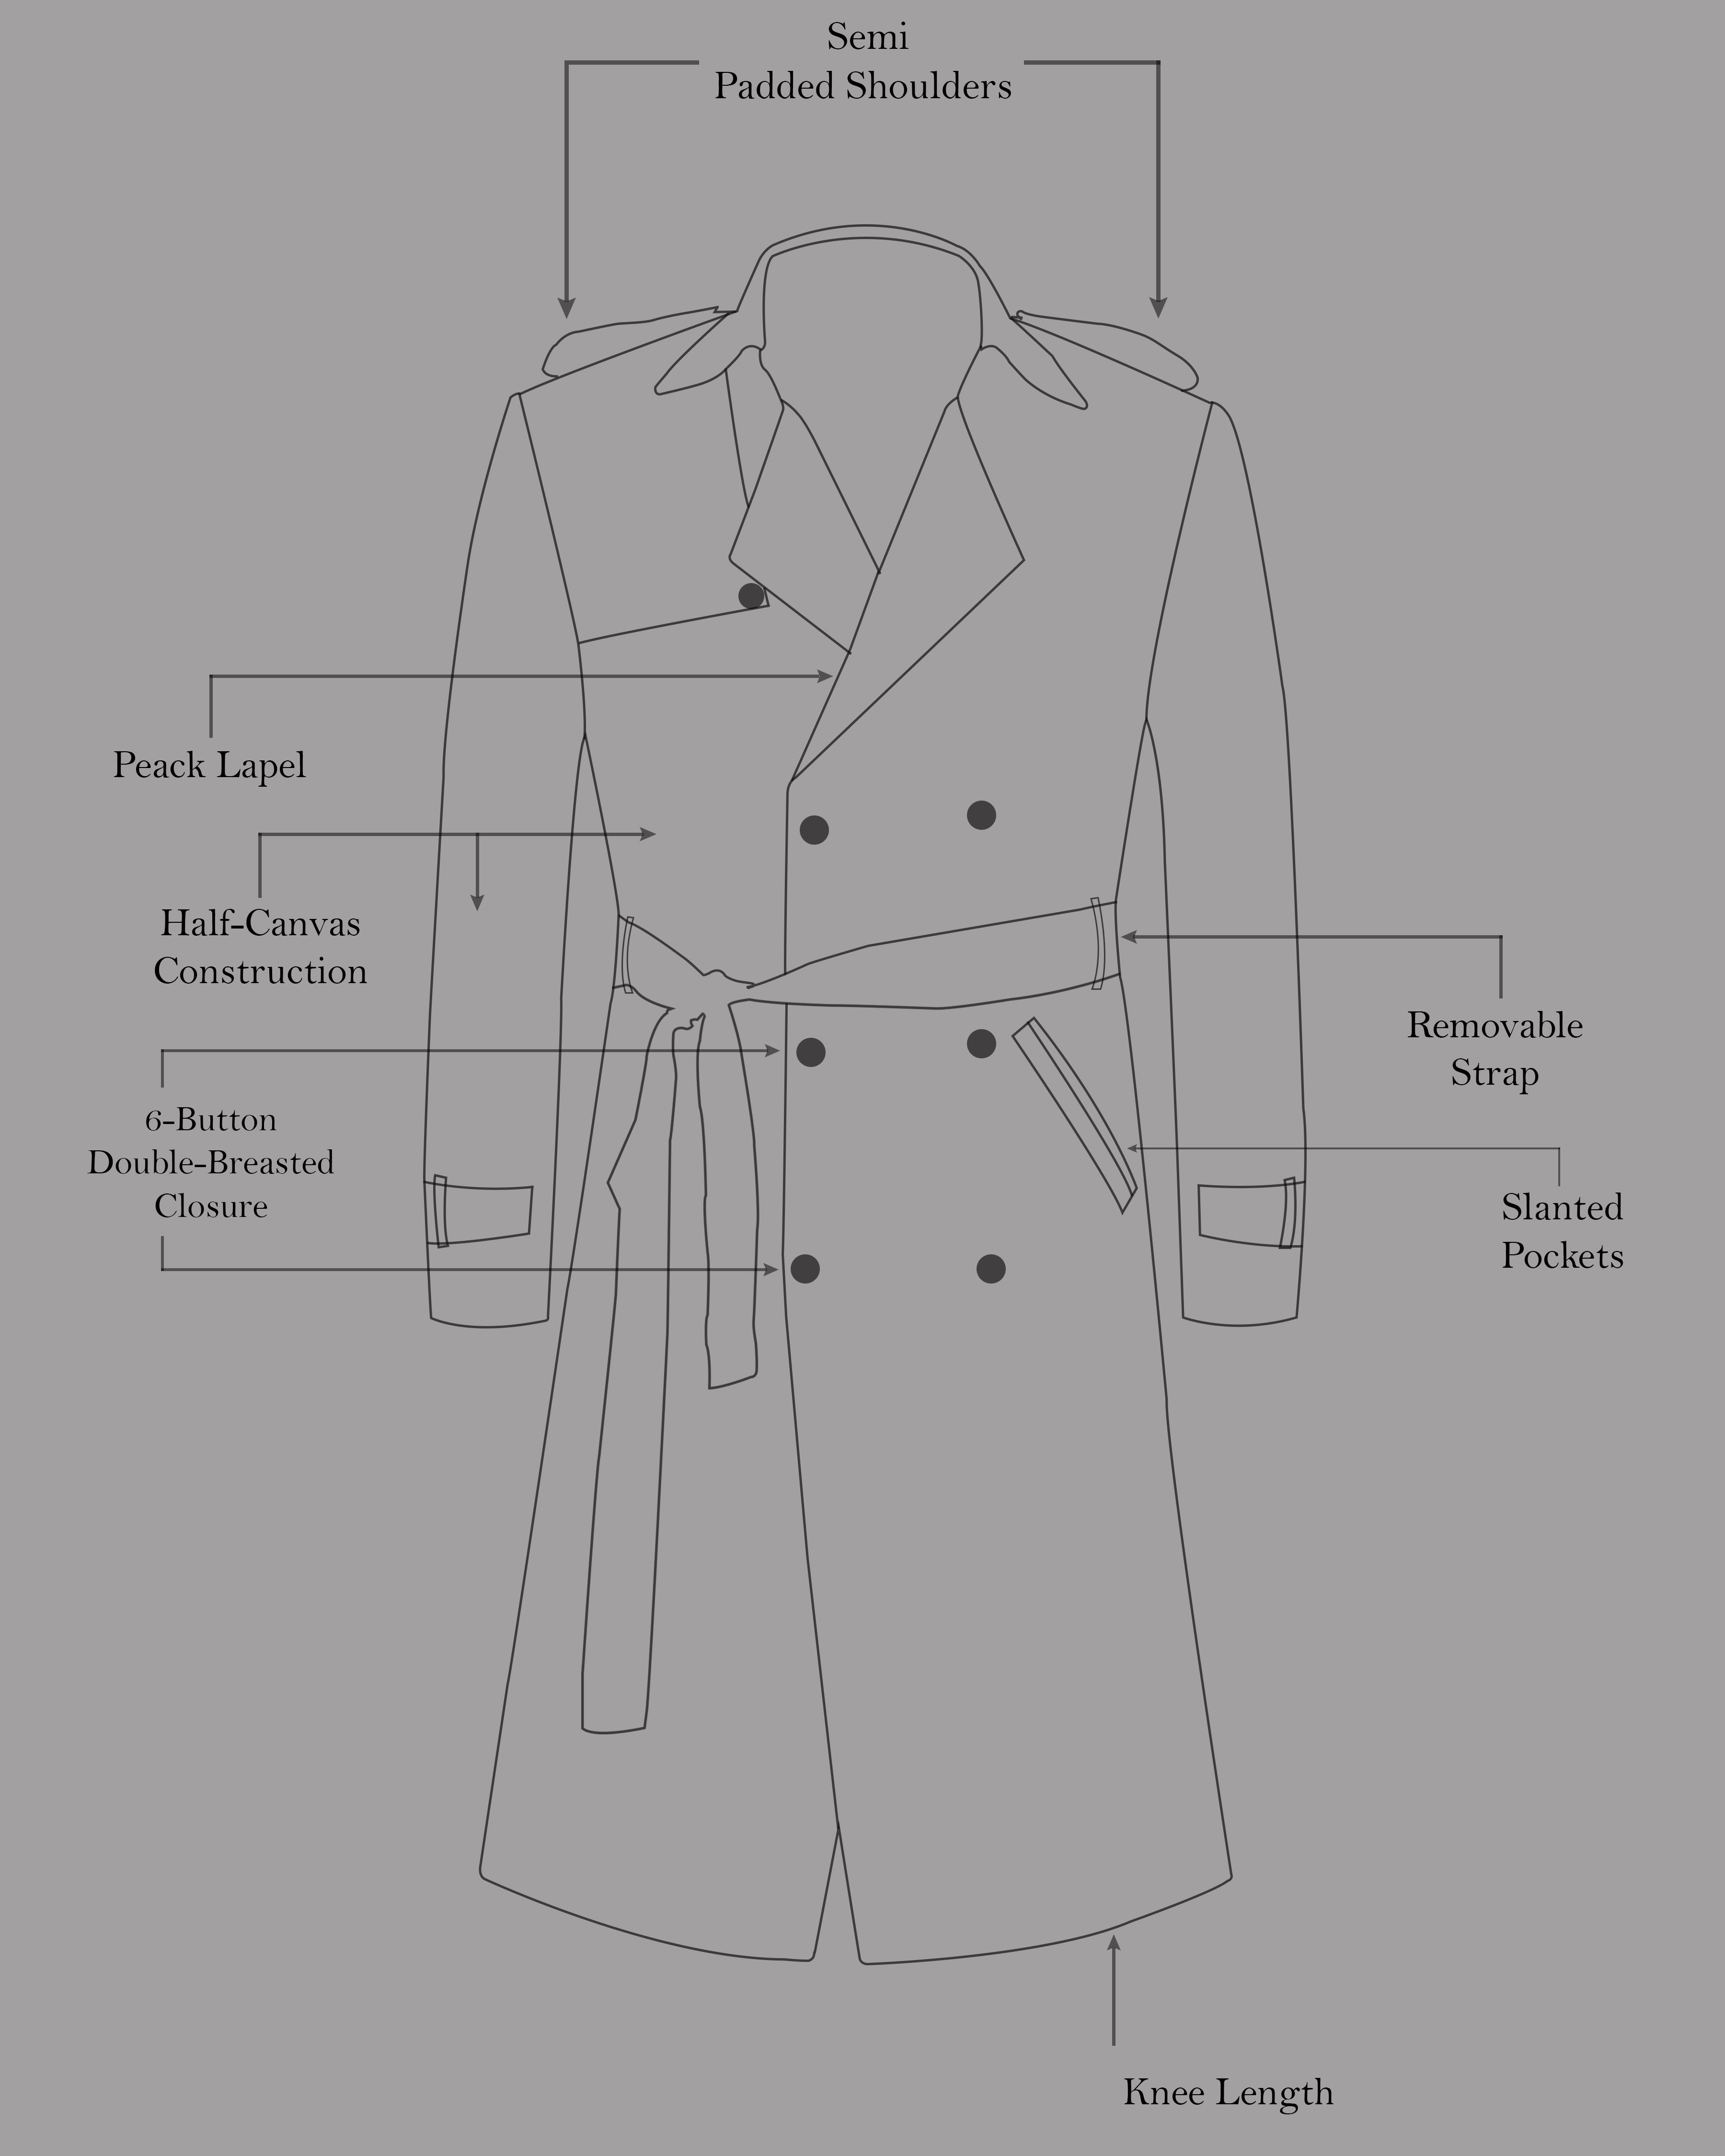 Sand Dune Double Breasted Belt Closure Designer Trench Coat TCB1827-DB-36, TCB1827-DB-38, TCB1827-DB-40, TCB1827-DB-42, TCB1827-DB-44, TCB1827-DB-46, TCB1827-DB-48, TCB1827-DB-50, TCB1827-DB-52, TCB1827-DB-54, TCB1827-DB-56, TCB1827-DB-58, TCB1827-DB-60